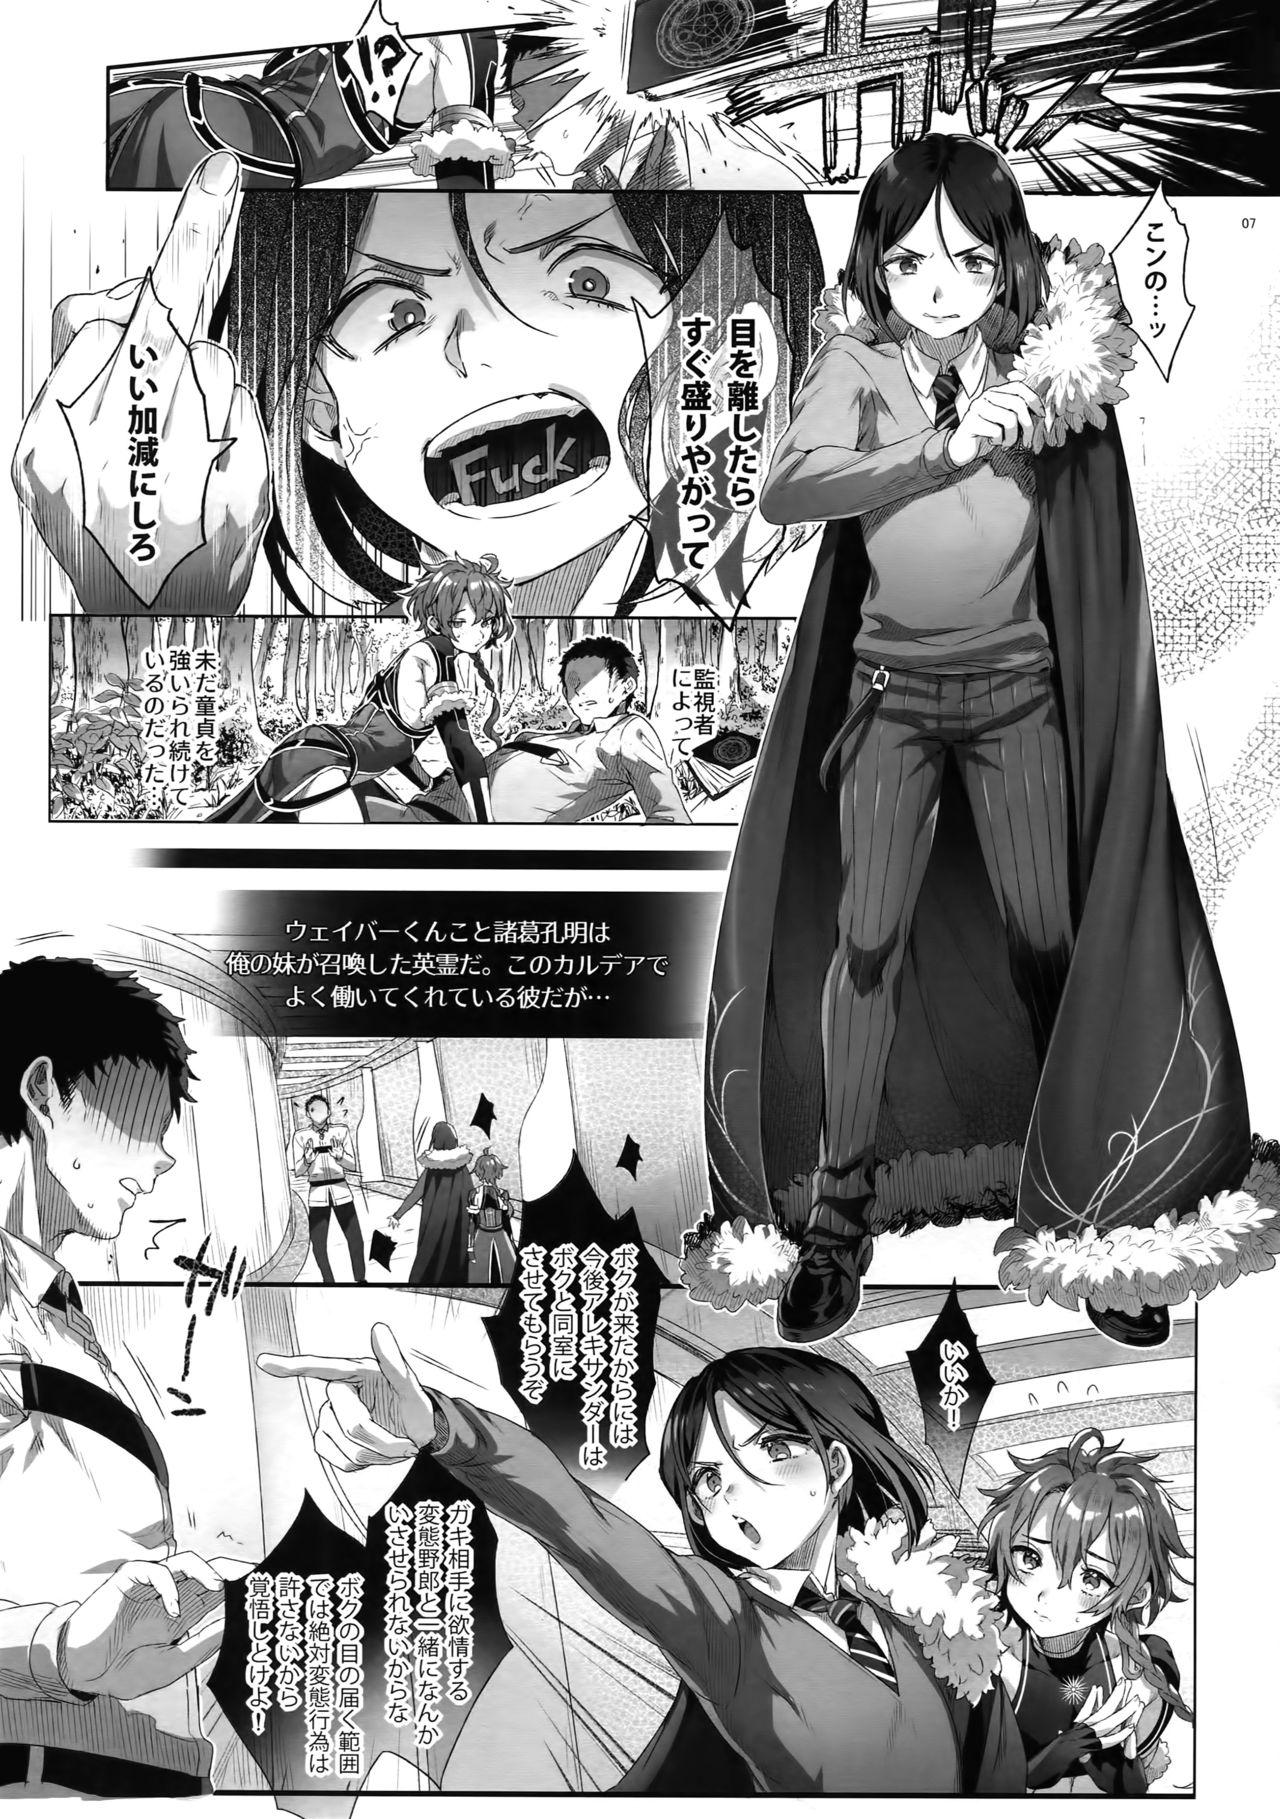 Pinoy Fate/DT♂rder Hiraki - Fate grand order Tongue - Page 6